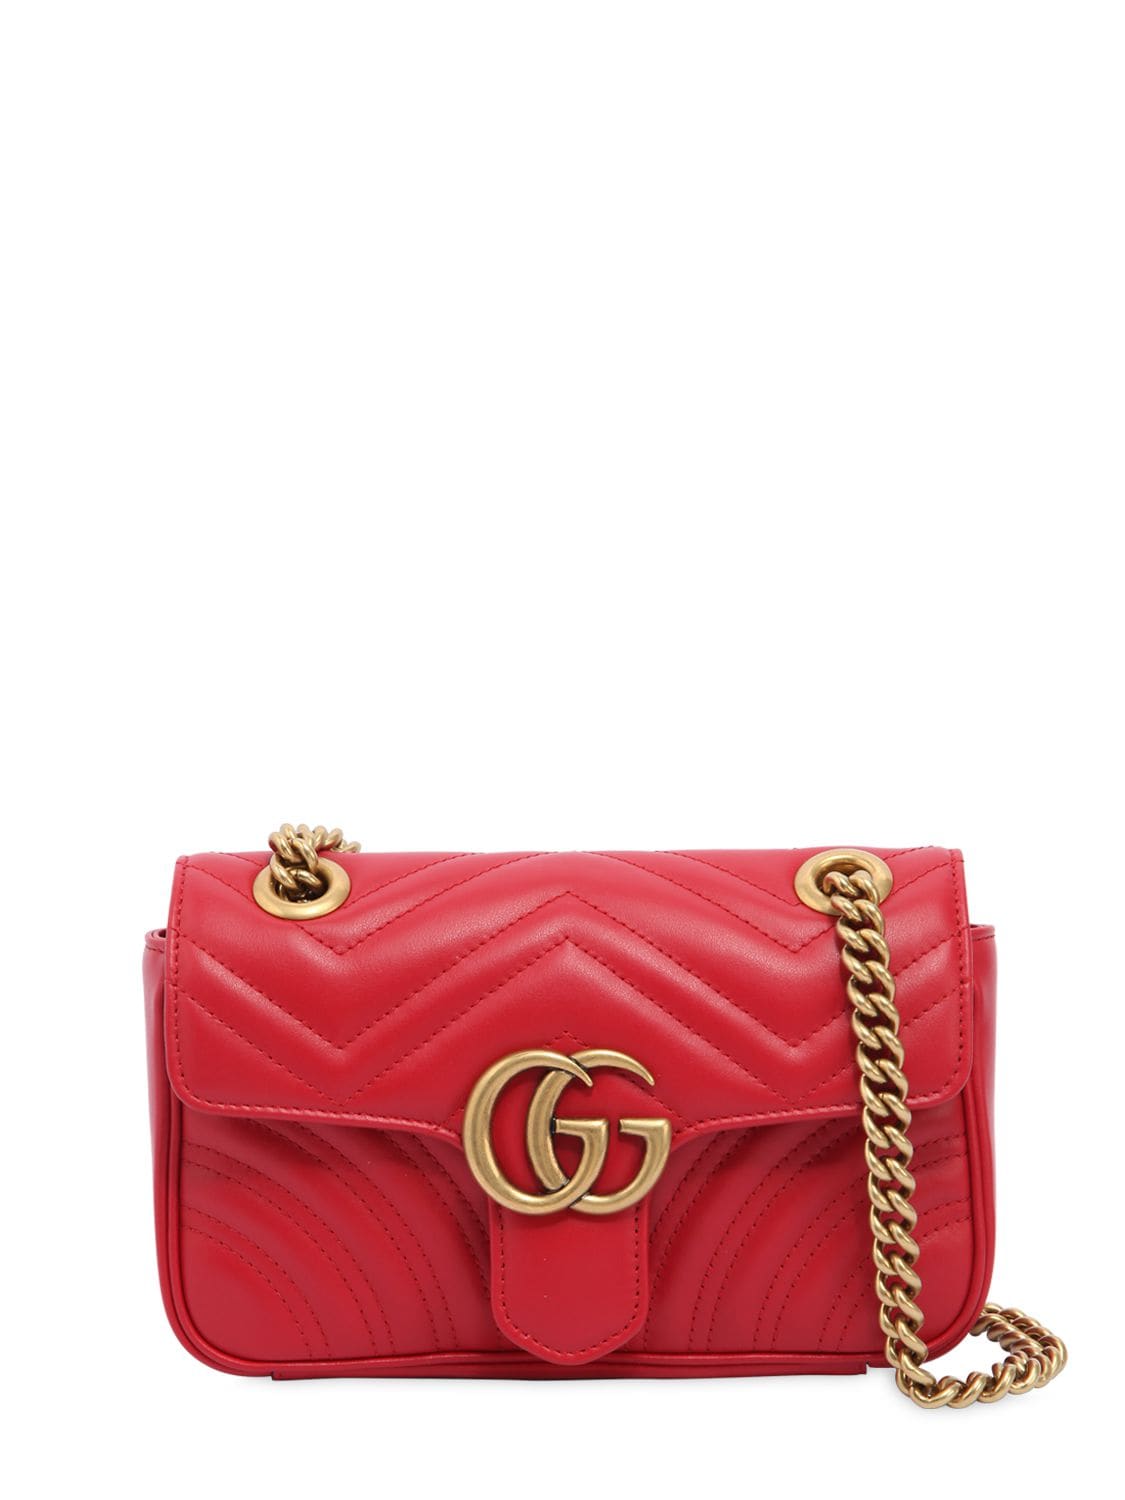 Gucci Mini Gg Marmont 2.0 Leather Shoulder Bag In Red